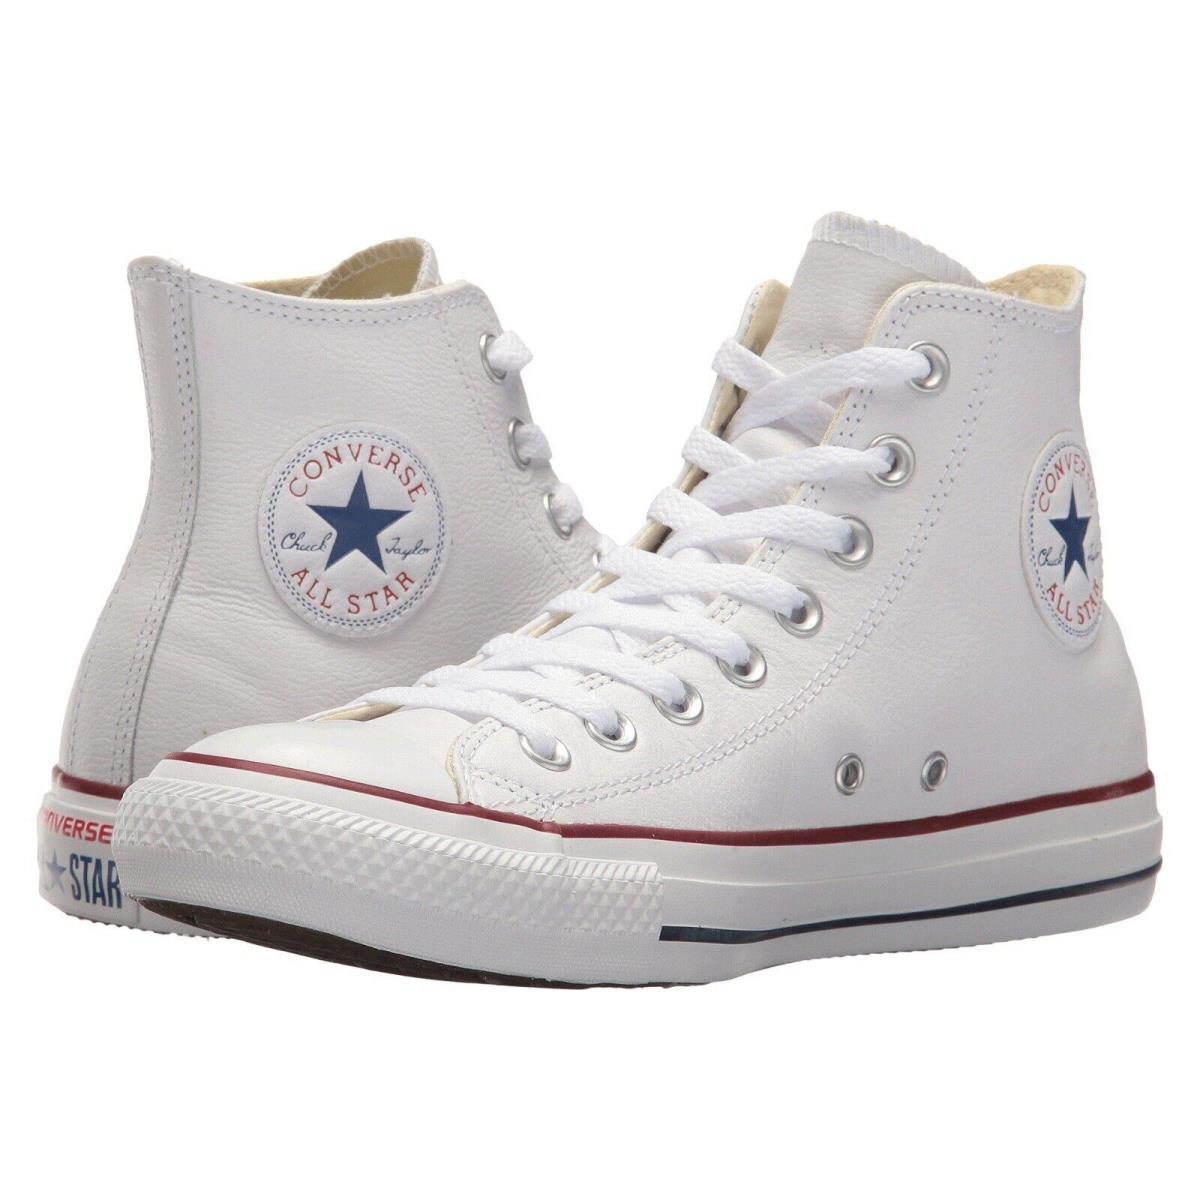 Converse Leather All Star Chuck Taylor Hi Top Sneakers Men Size:4 Women:6 Shoes